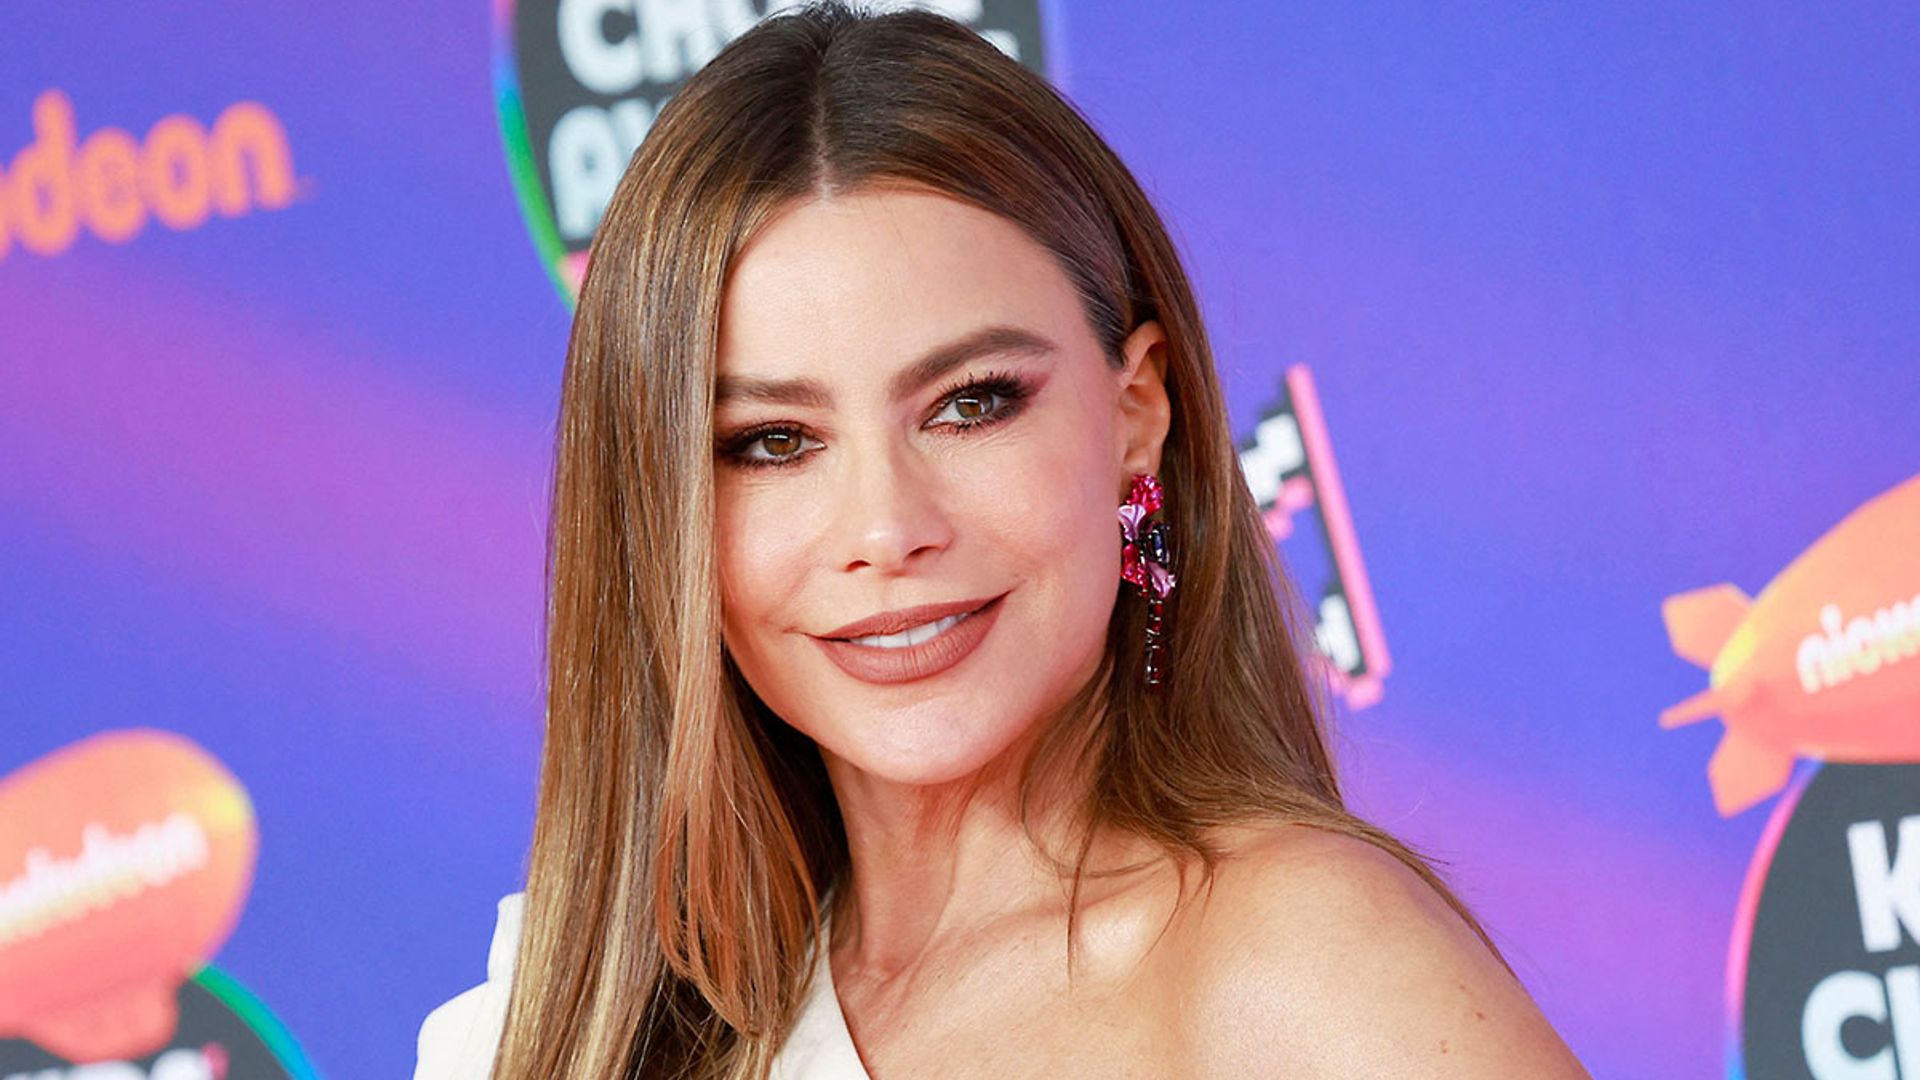 Sofia Vergara surprises fans with extreme eyebrow transformation as she preps for Netflix role